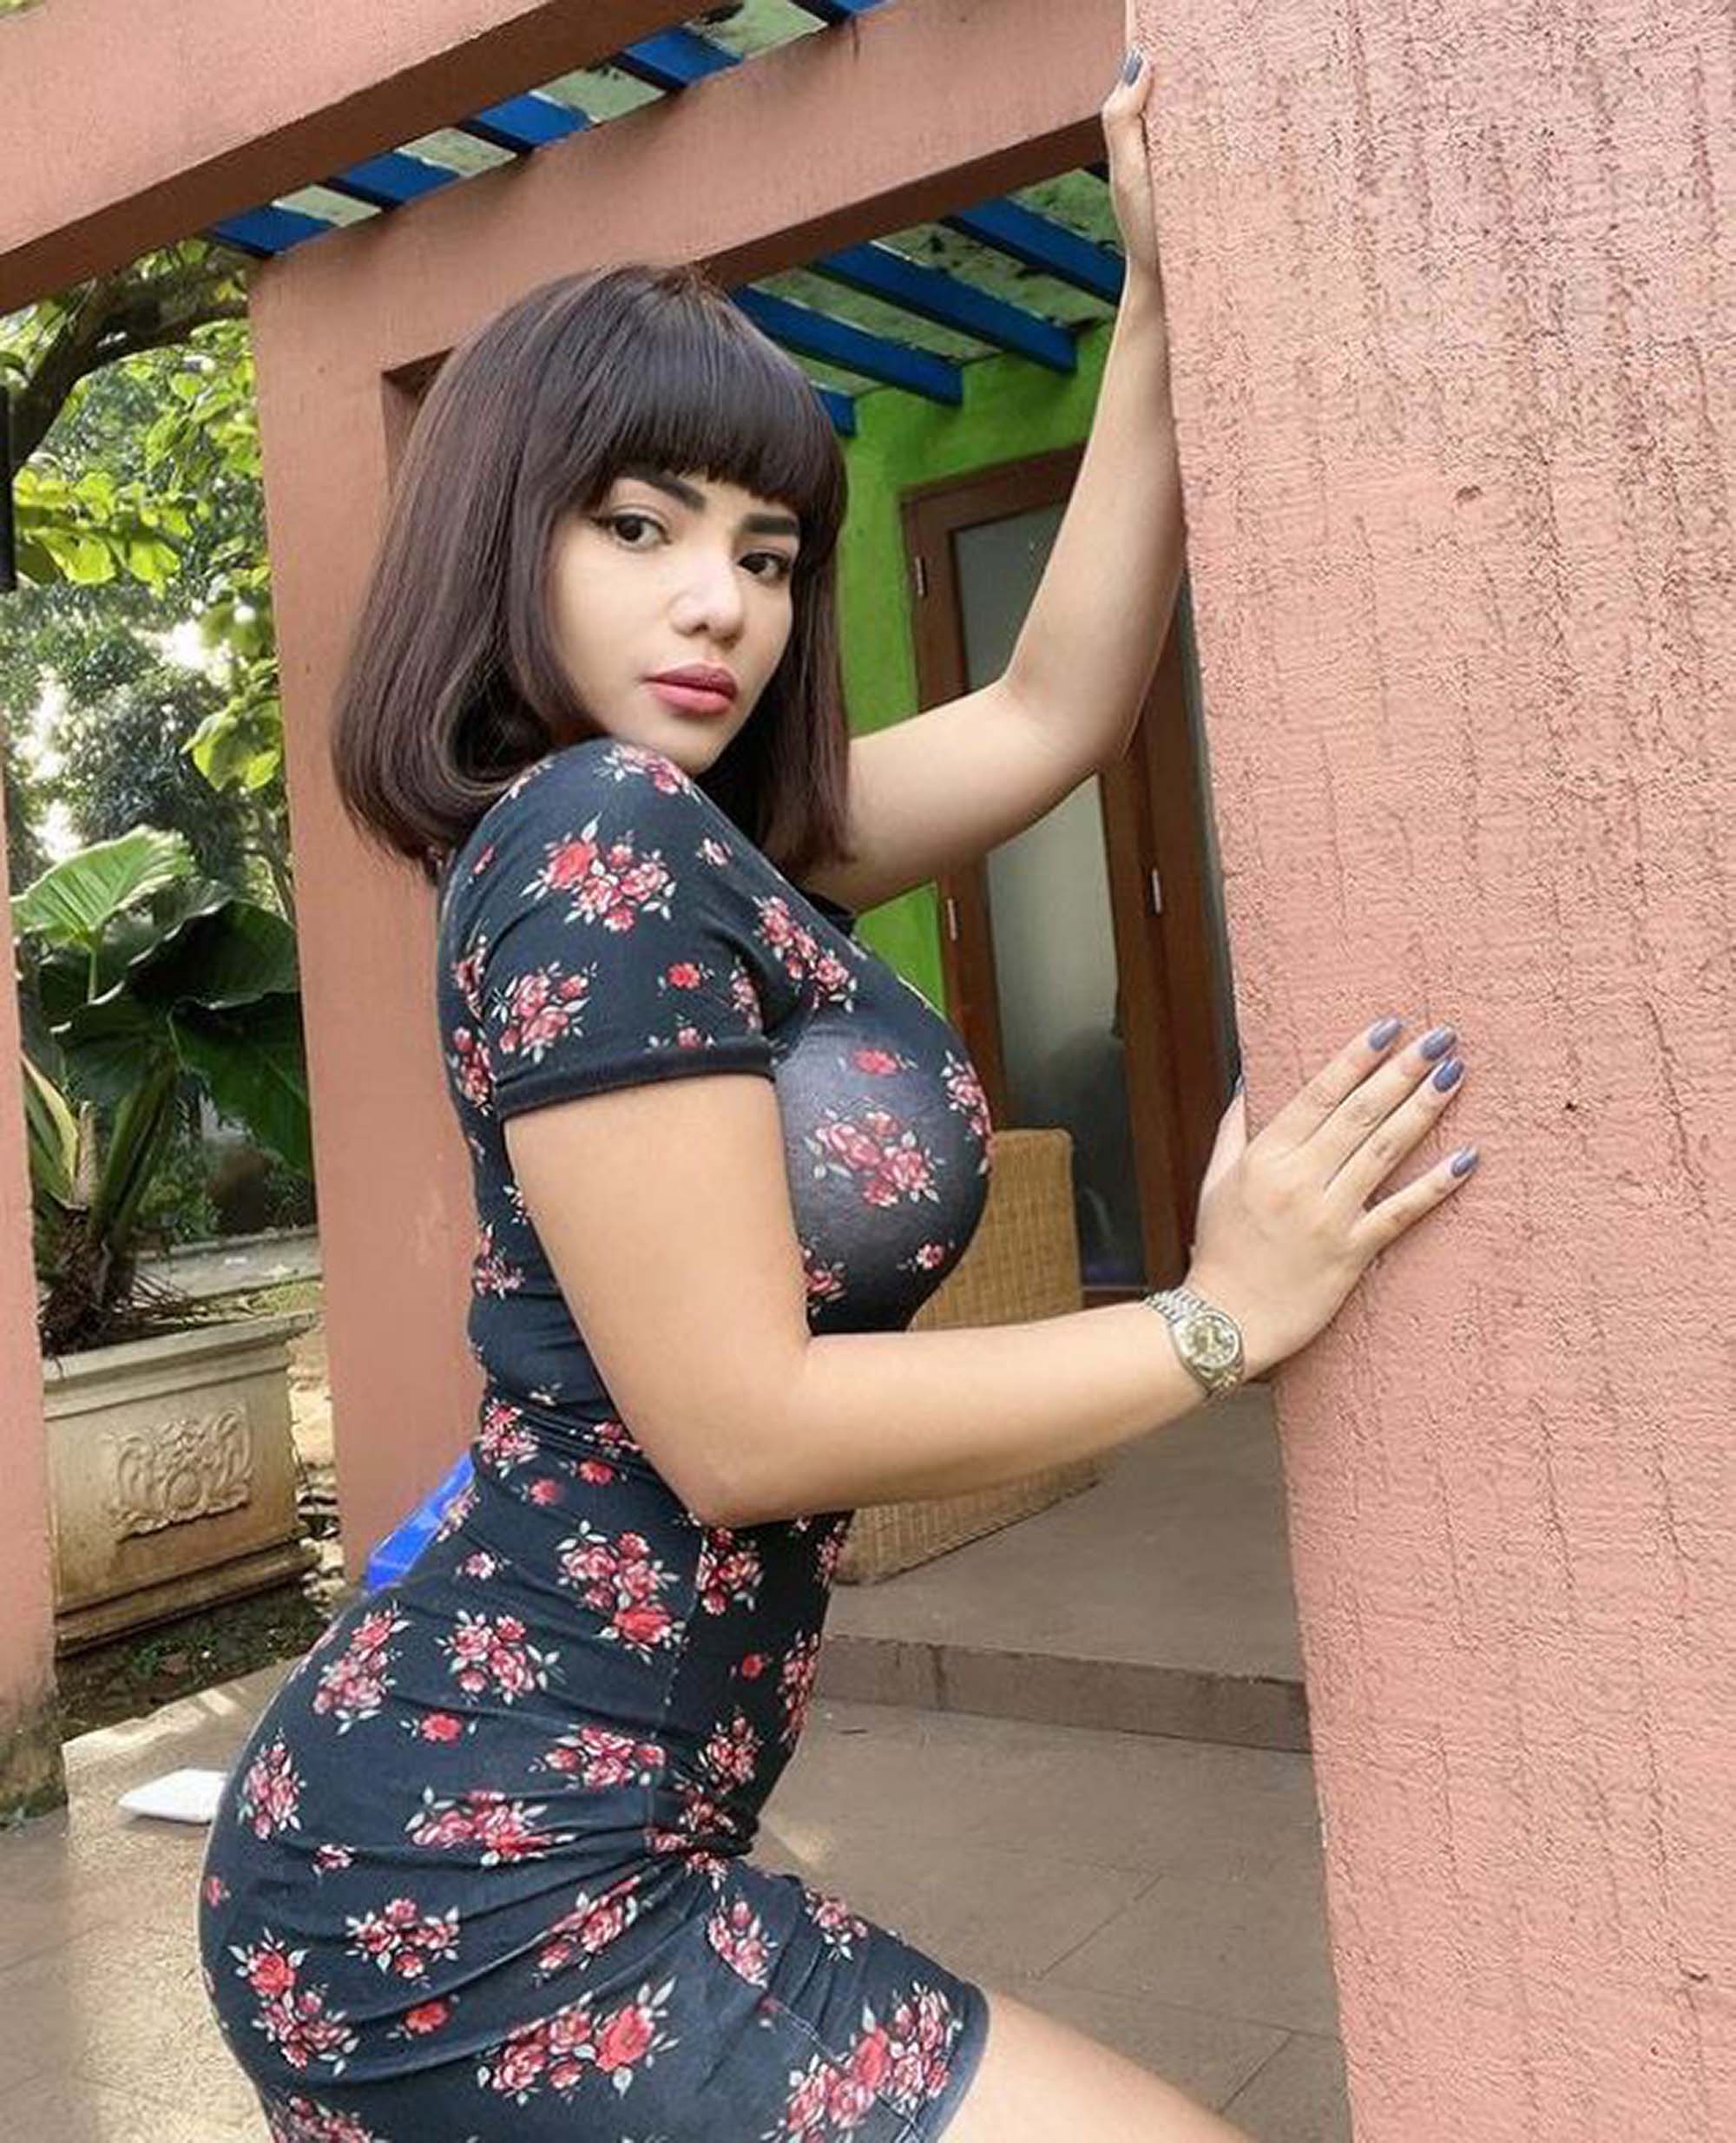 Read more about the article Hot Indonesian Influencer Arrested For Staging Lockdown Protest In Bikini